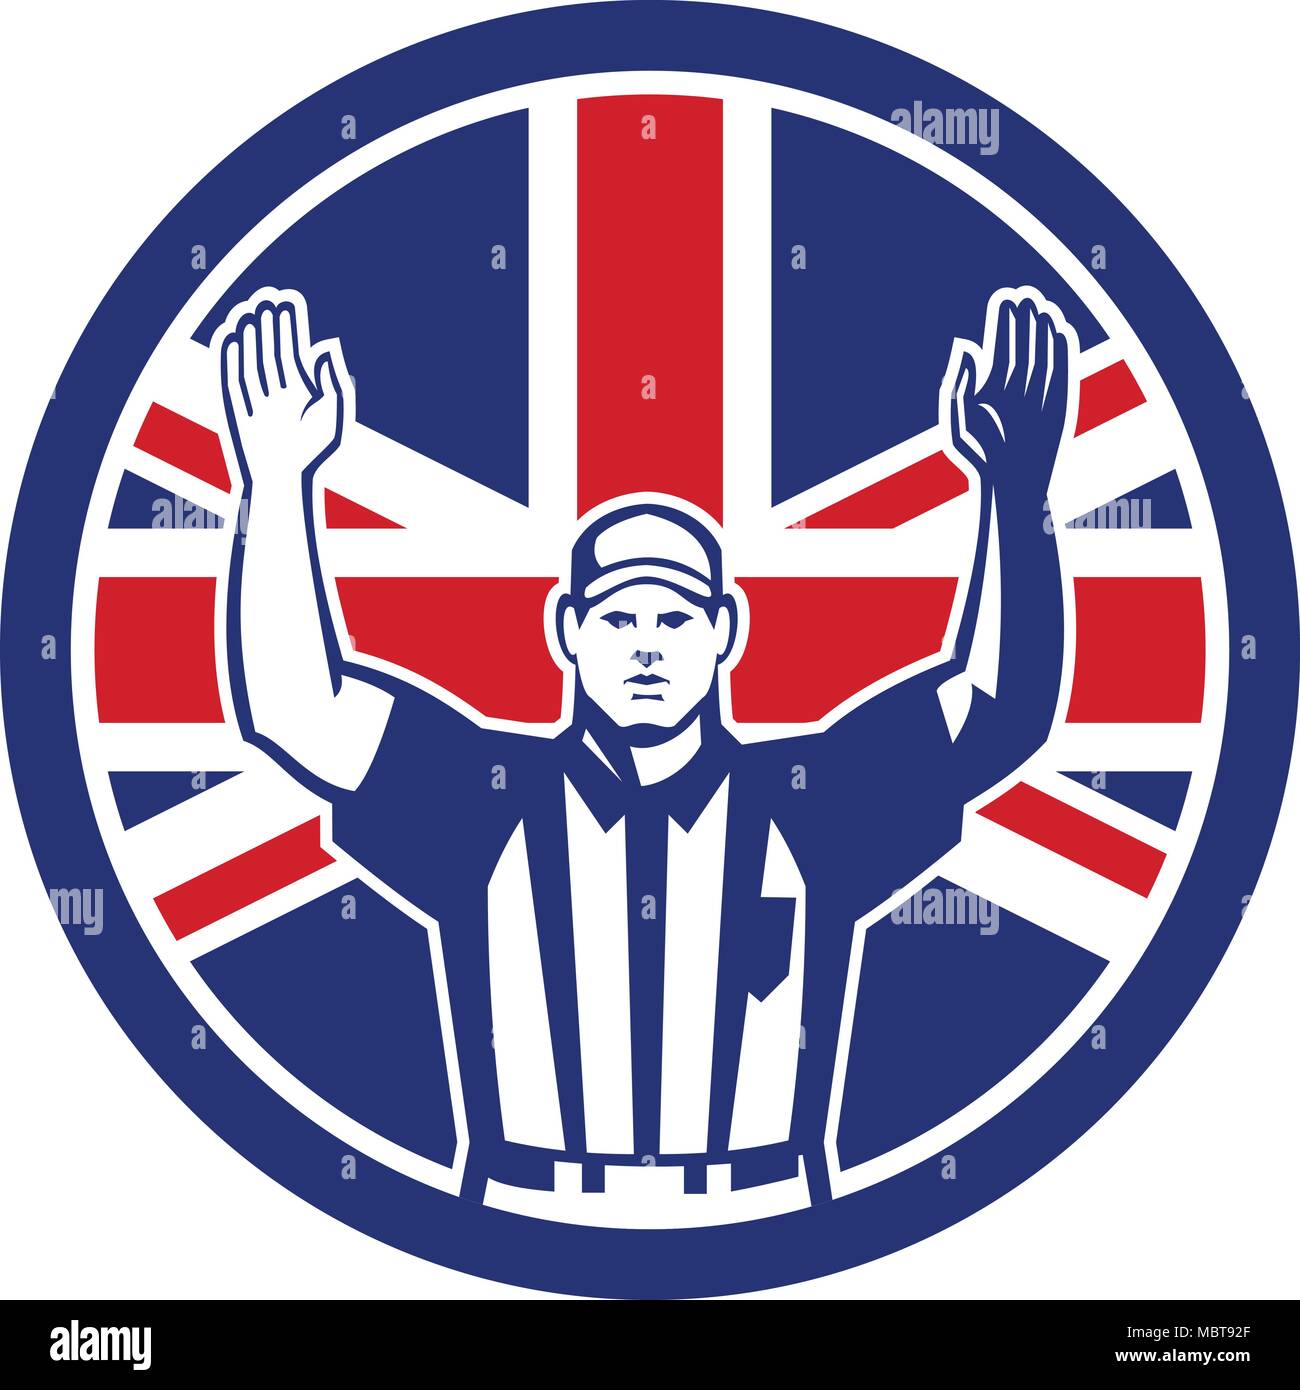 Icon retro style illustration of a British American football referee,head linesman, down judge or line judge calling touchdown with United Kingdom UK, Stock Vector